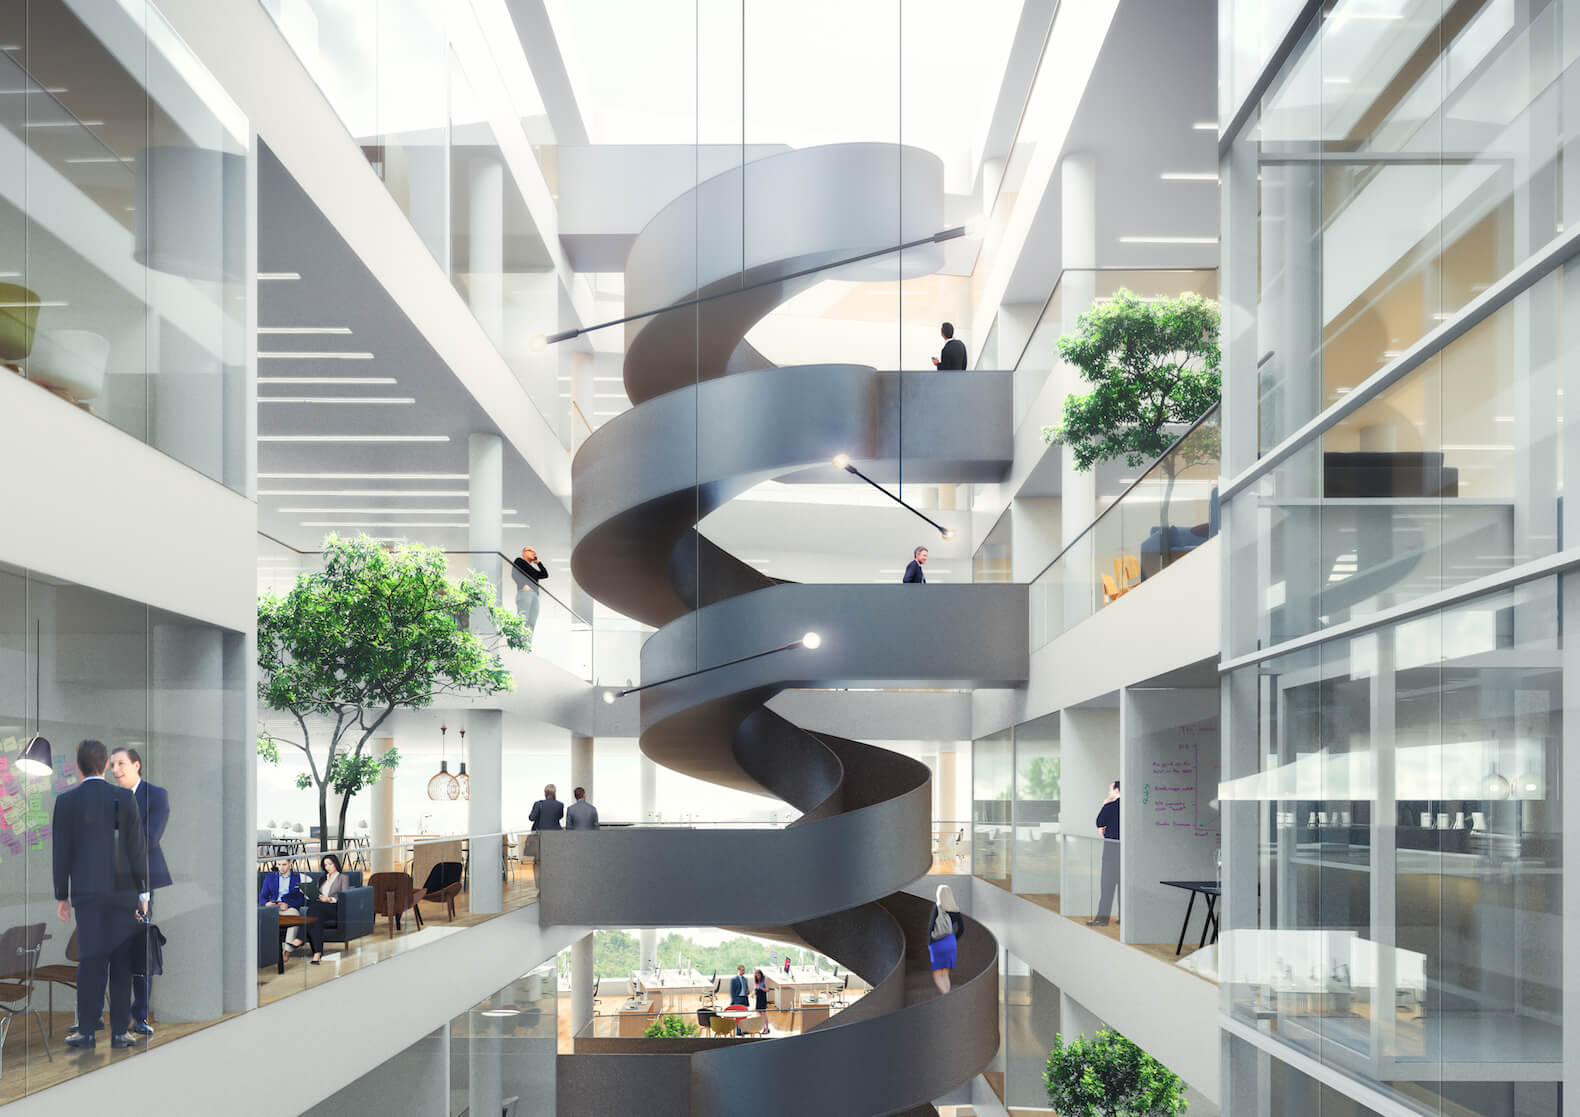 A spiral staircase inside of a building with people walking around
